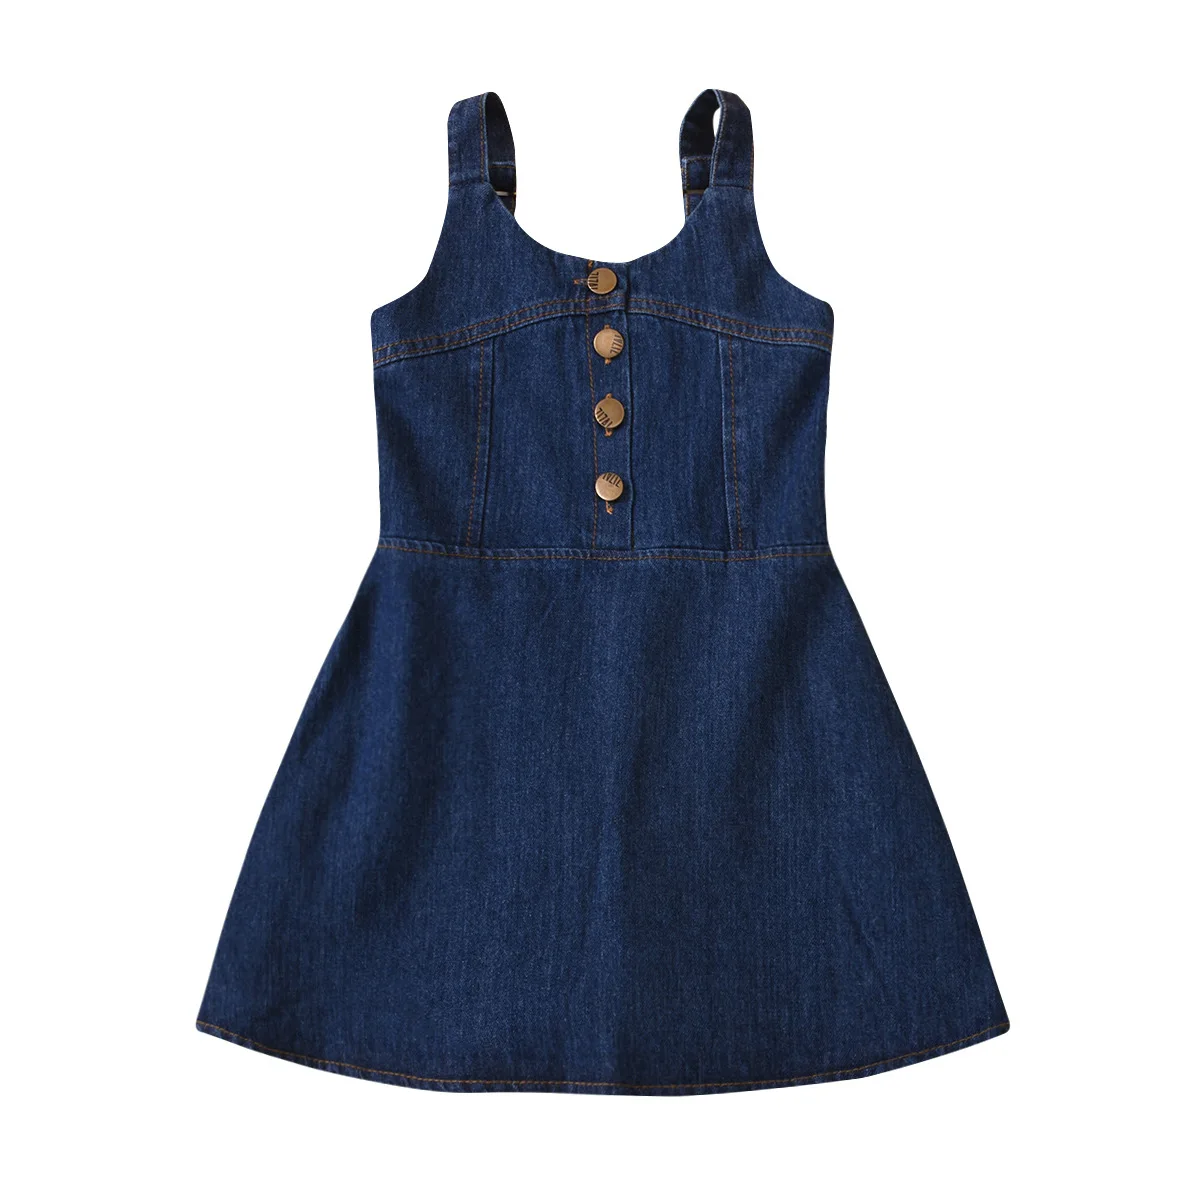 Kids Beautiful Model Dresses Spring Kids Jeans Dress Girl Wholesale - Buy  Kids Jeans Dress Girl,Spring Kids Jeans Dress Girl,Kids Jeans Dress Girl  Wholesale Product on 